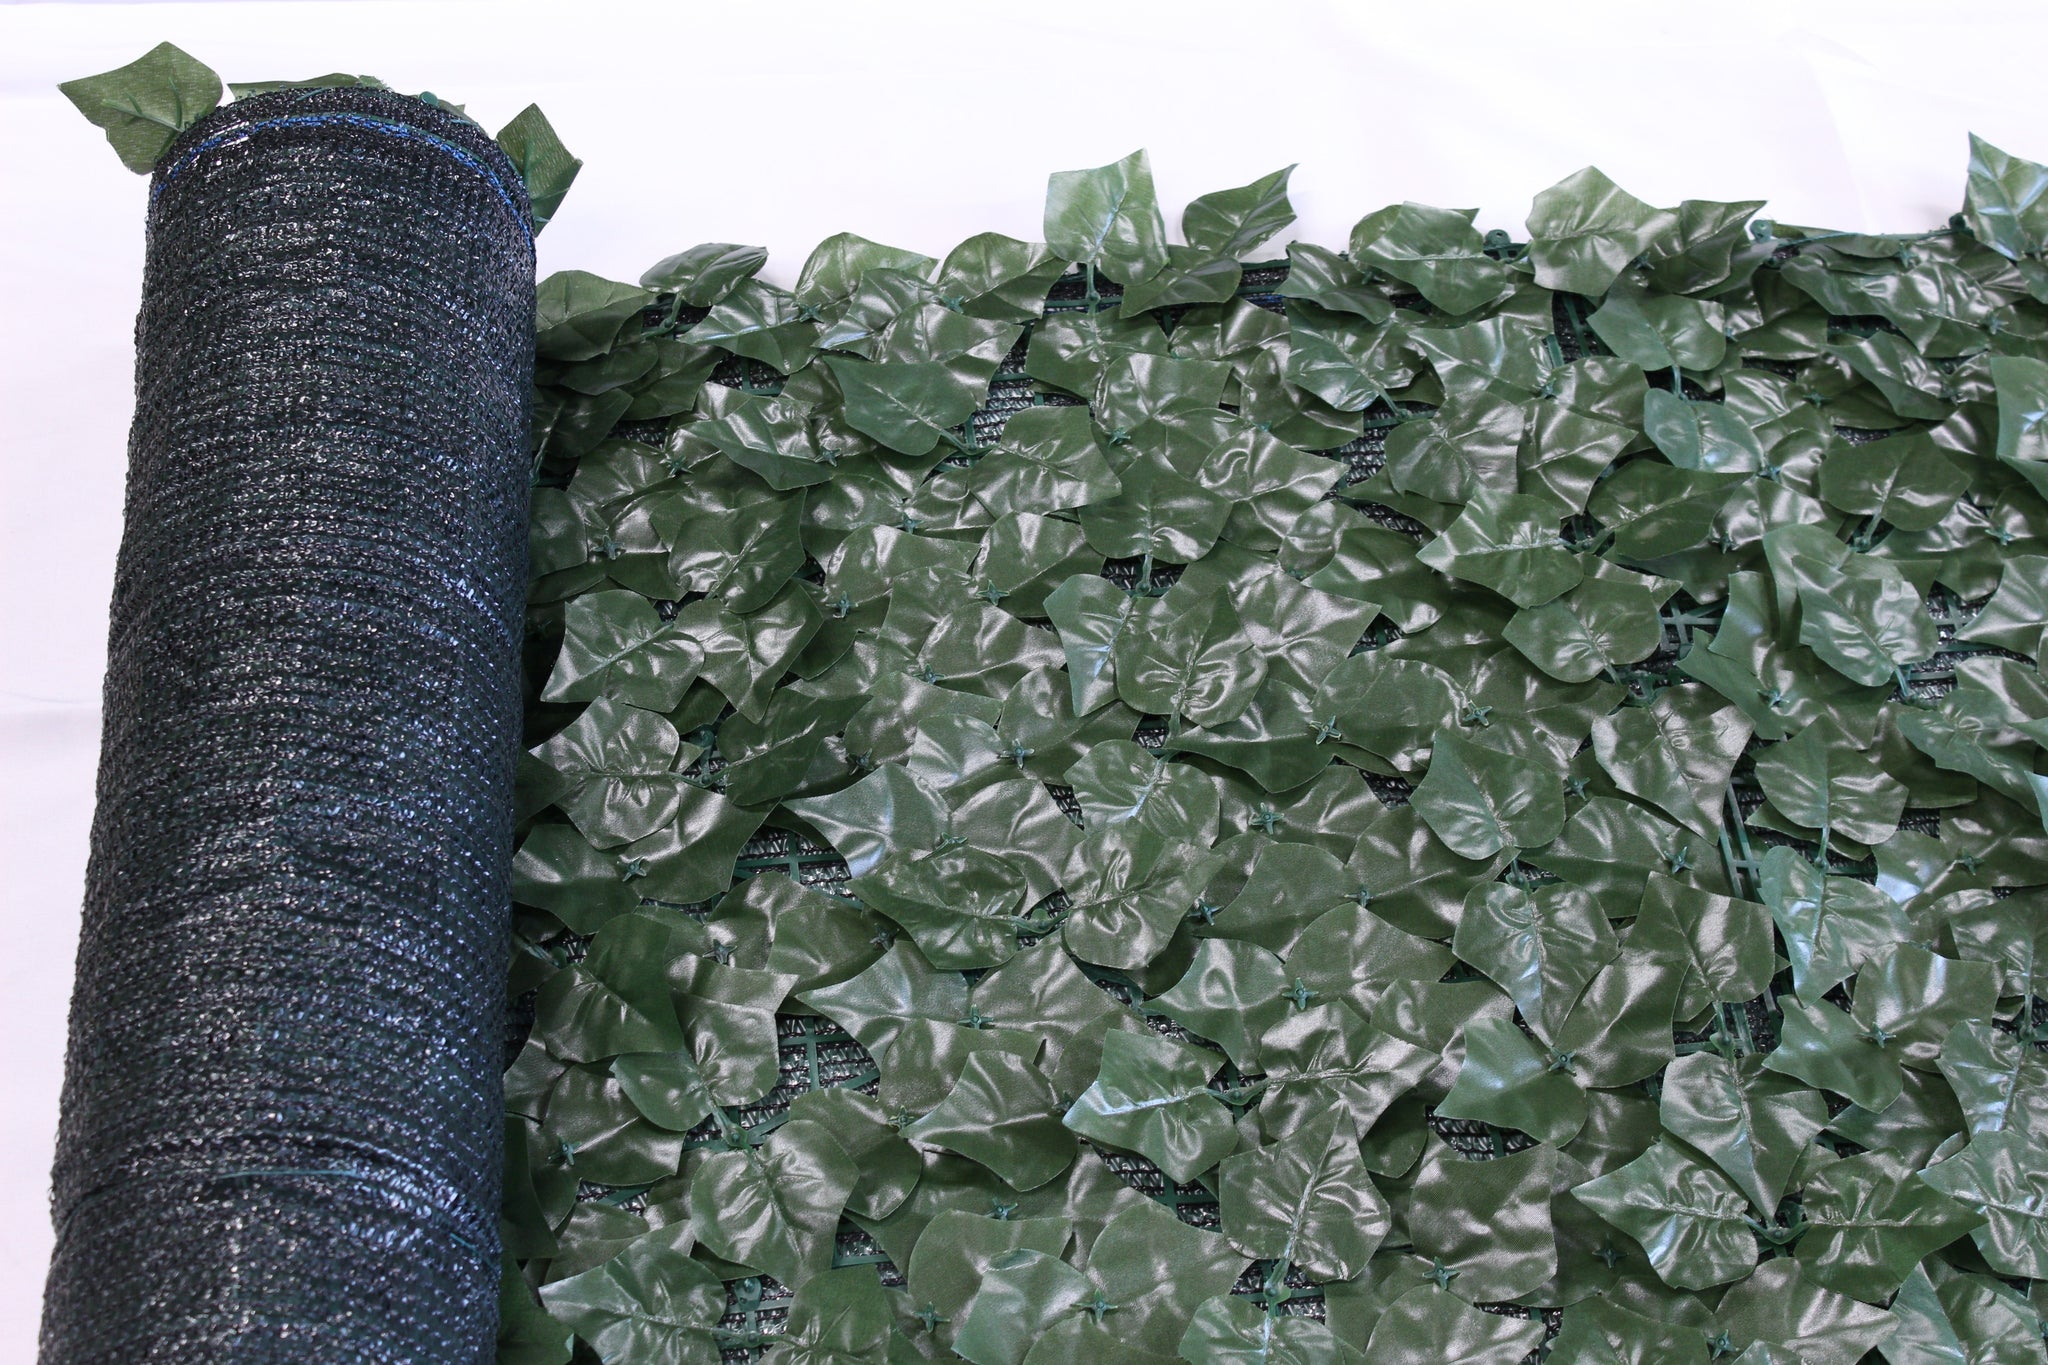 Best Artificial 3m x 1m English Ivy Leaf Screening with Net Privacy Backing